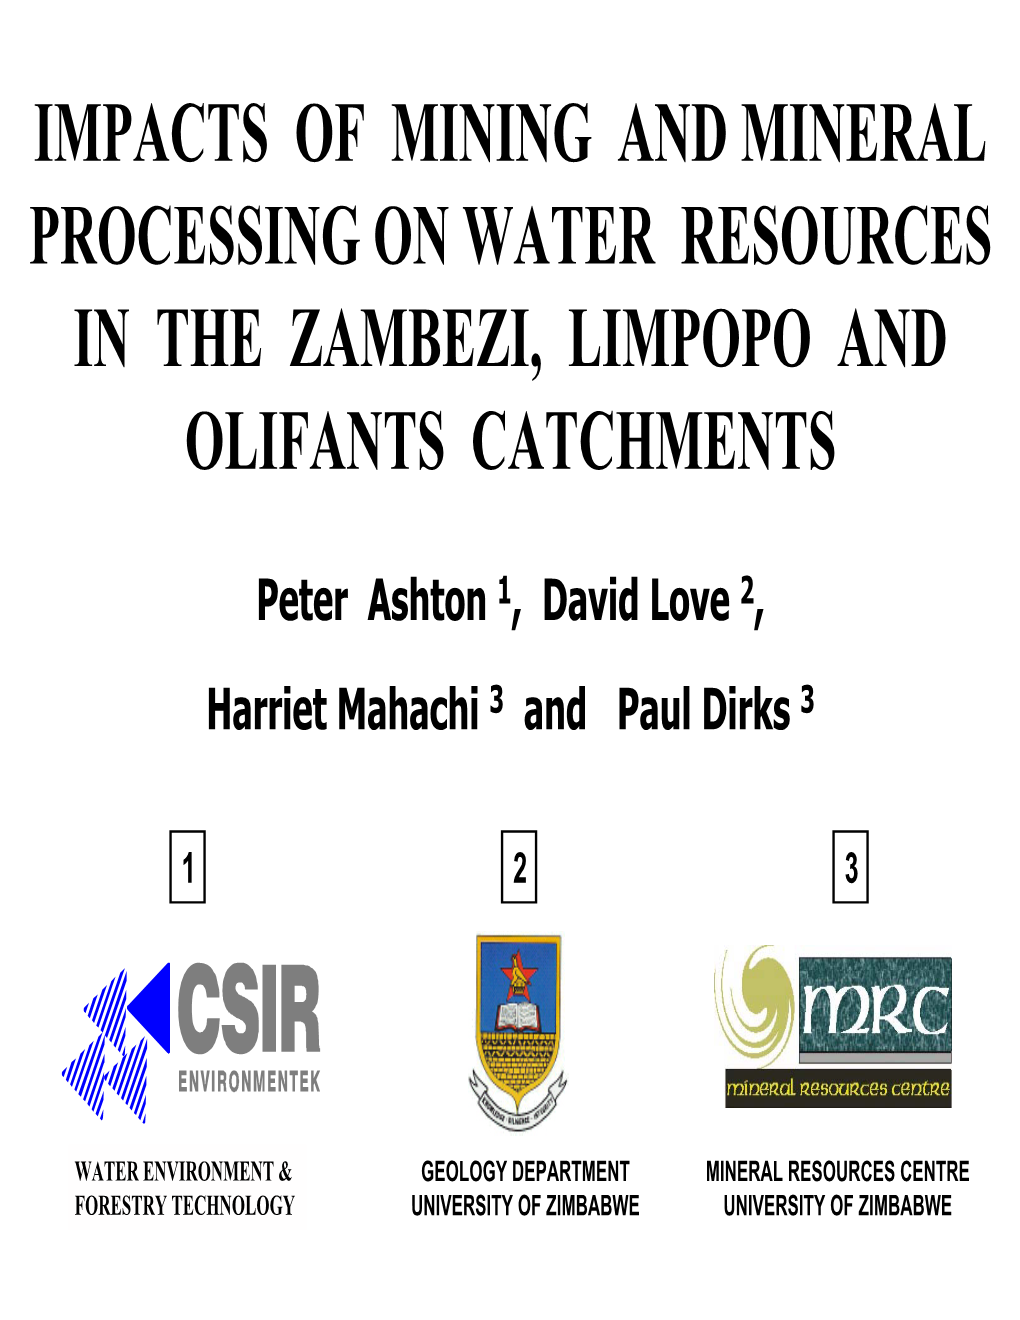 Impacts of Mining and Mineral Processing on Water Resources in the Zambezi, Limpopo and Olifants Catchments